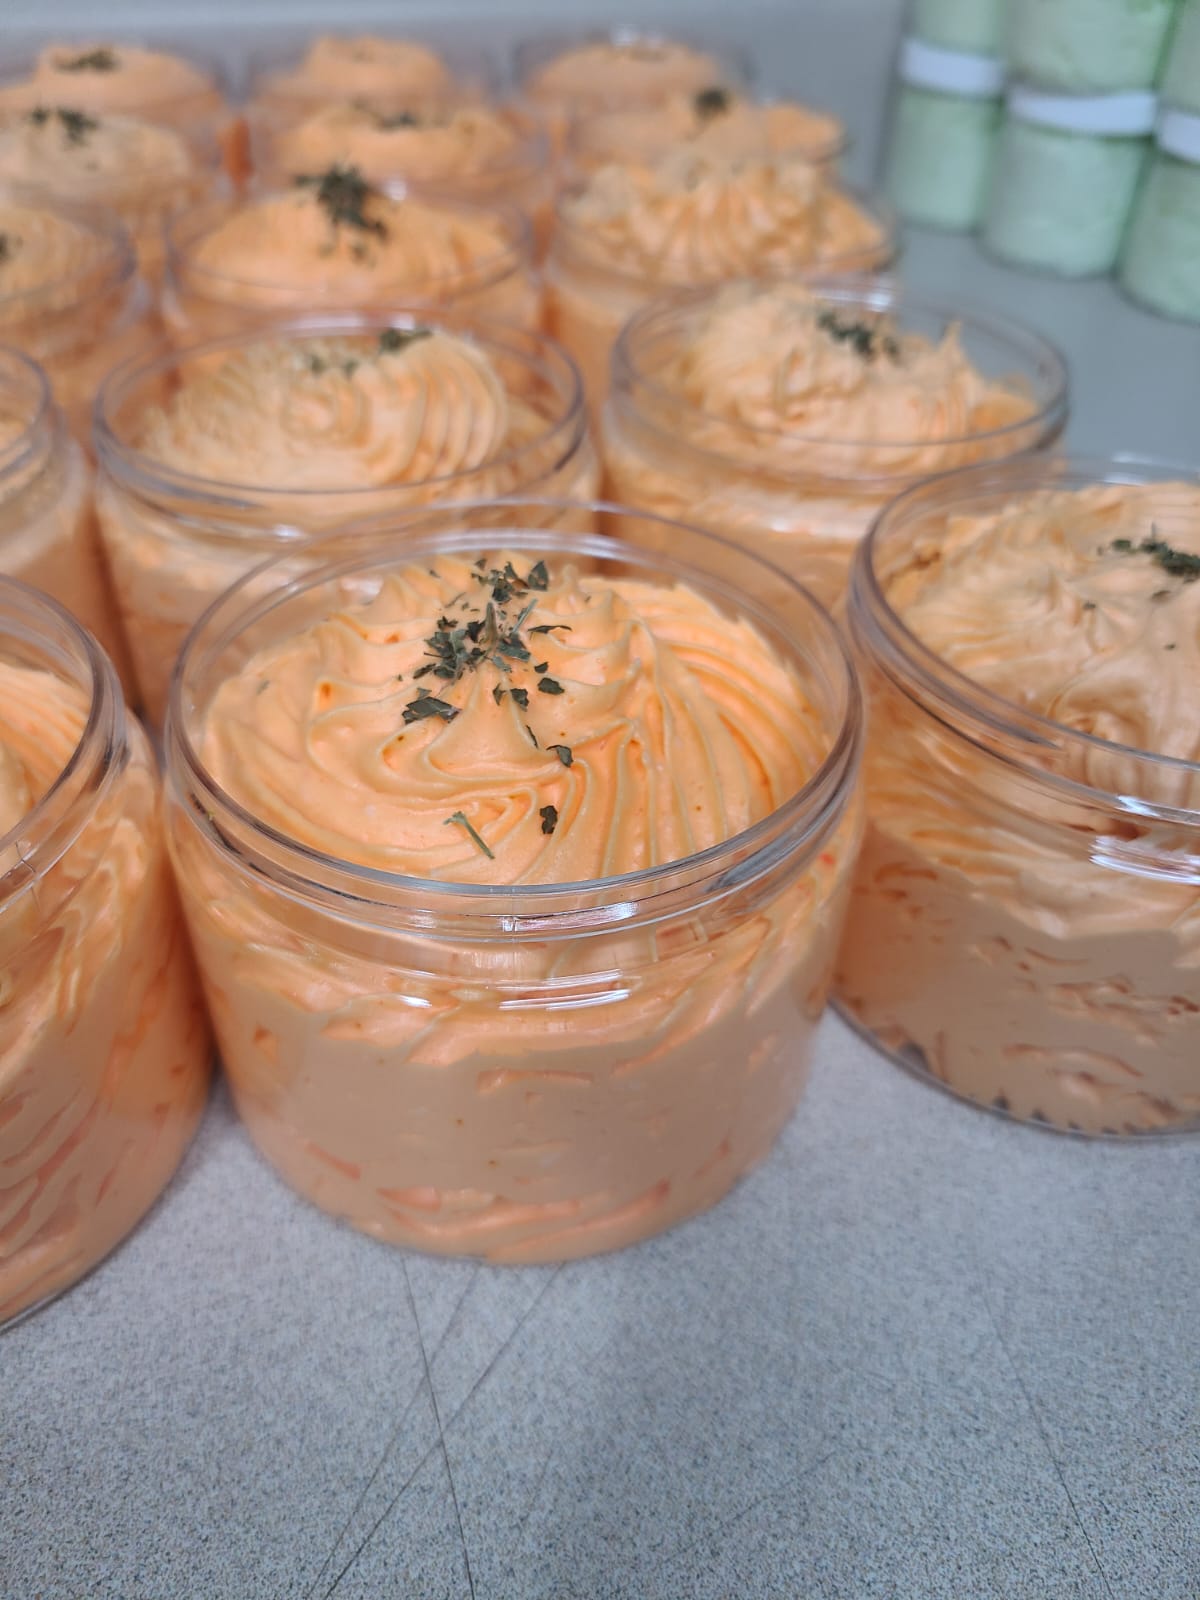 Pumpkin spice whipped soap